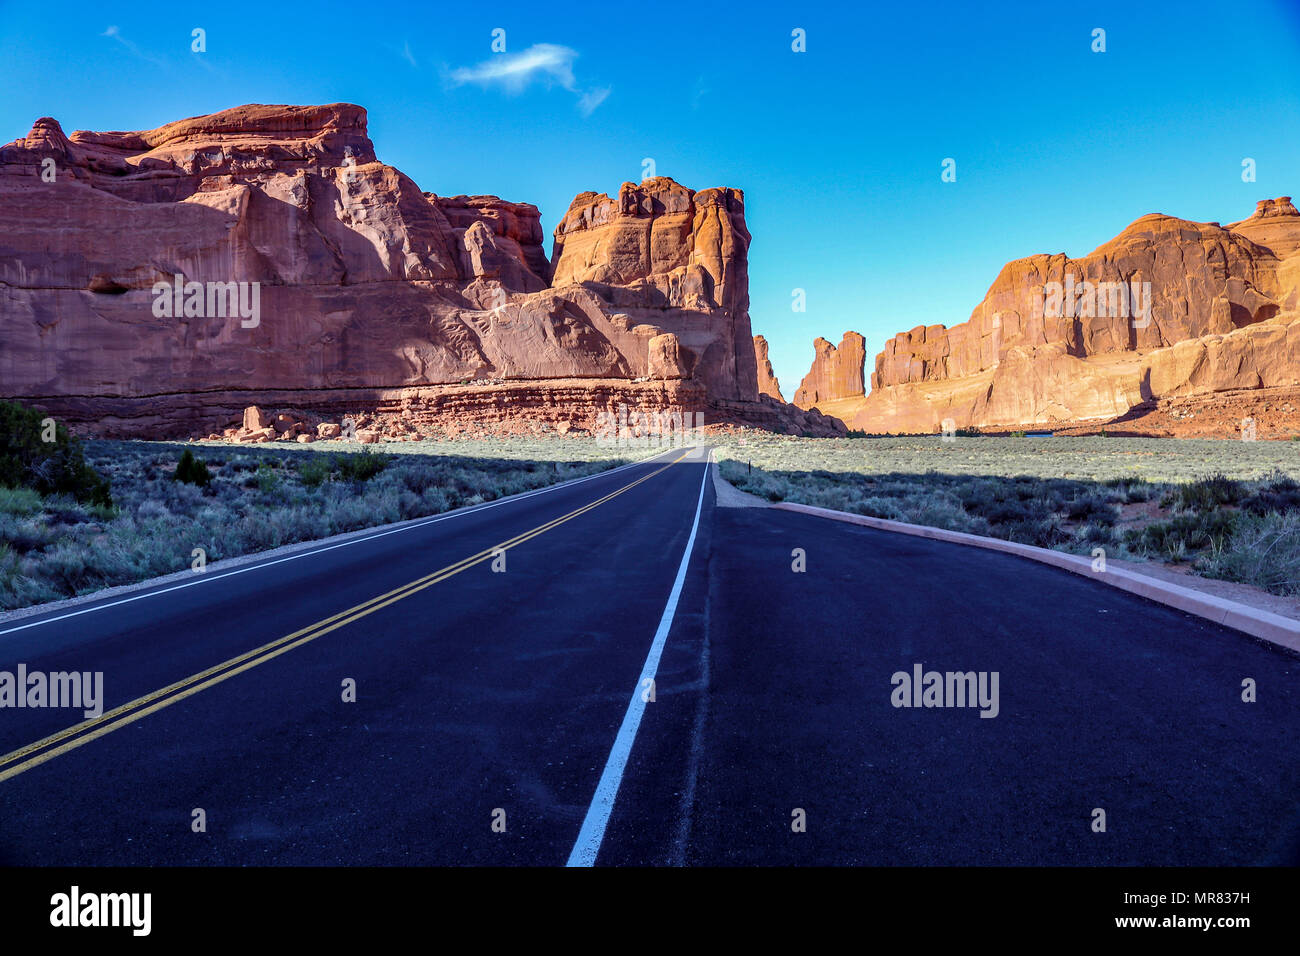 Road trip through the Arches National Park, Moab Utah. The black pavement of the road leads to the sandstone monuments and rock formations. Stock Photo